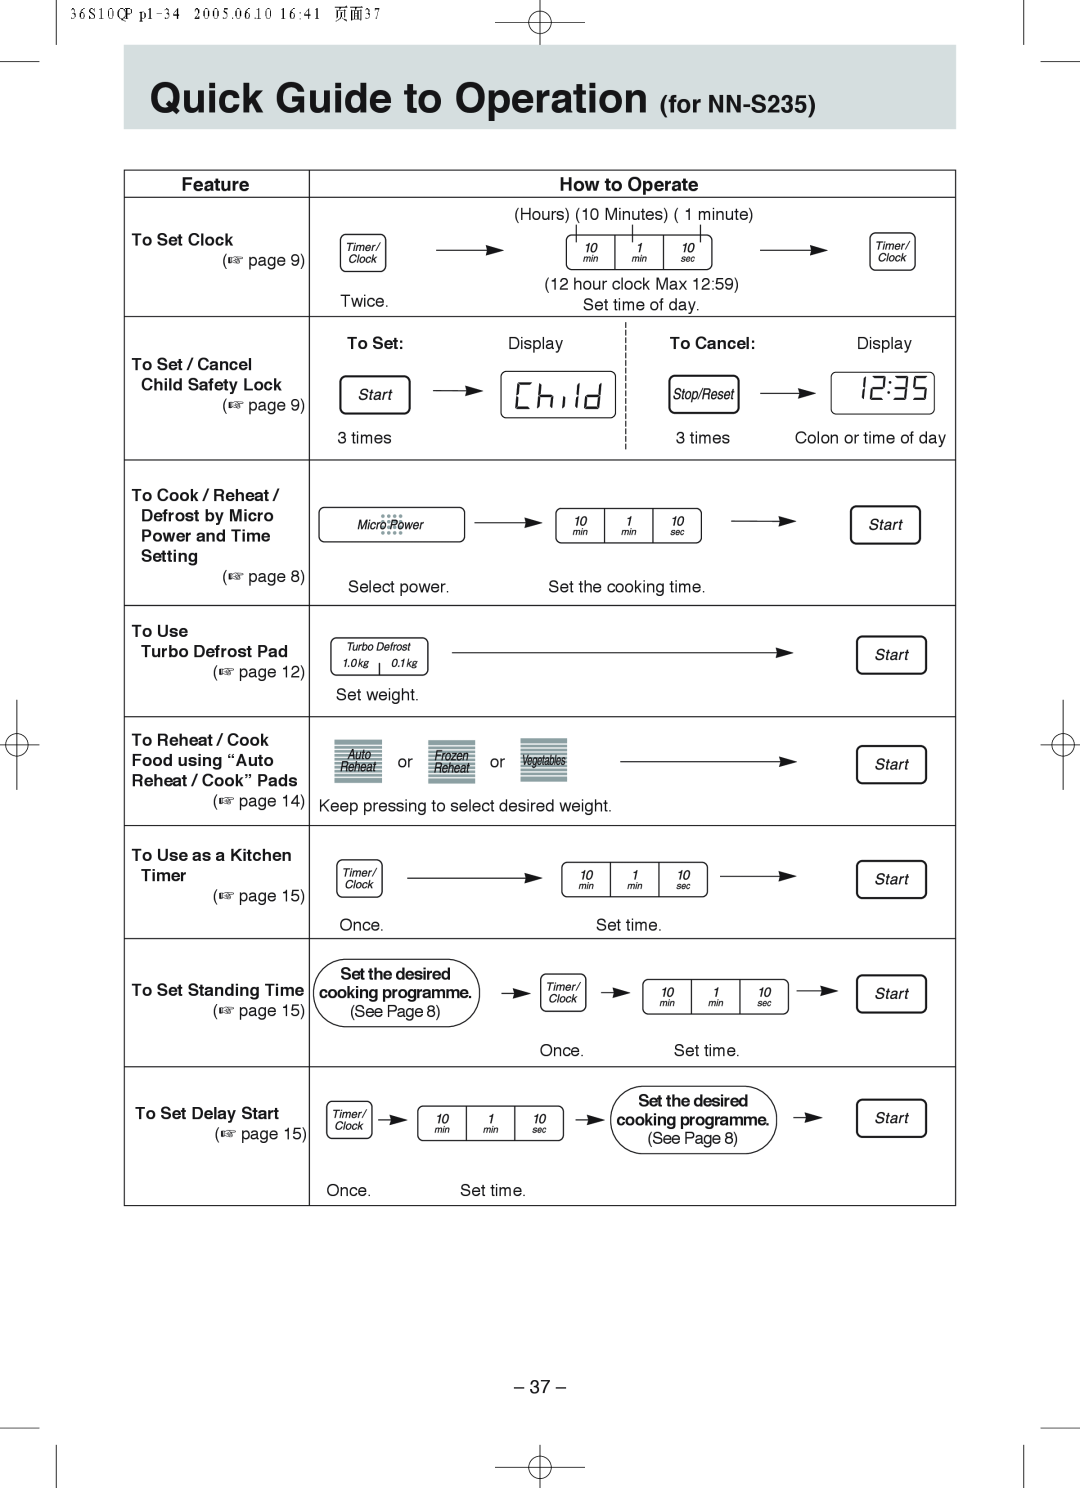 Panasonic NN-S215 manual Quick Guide to Operation for NN-S235, Feature 